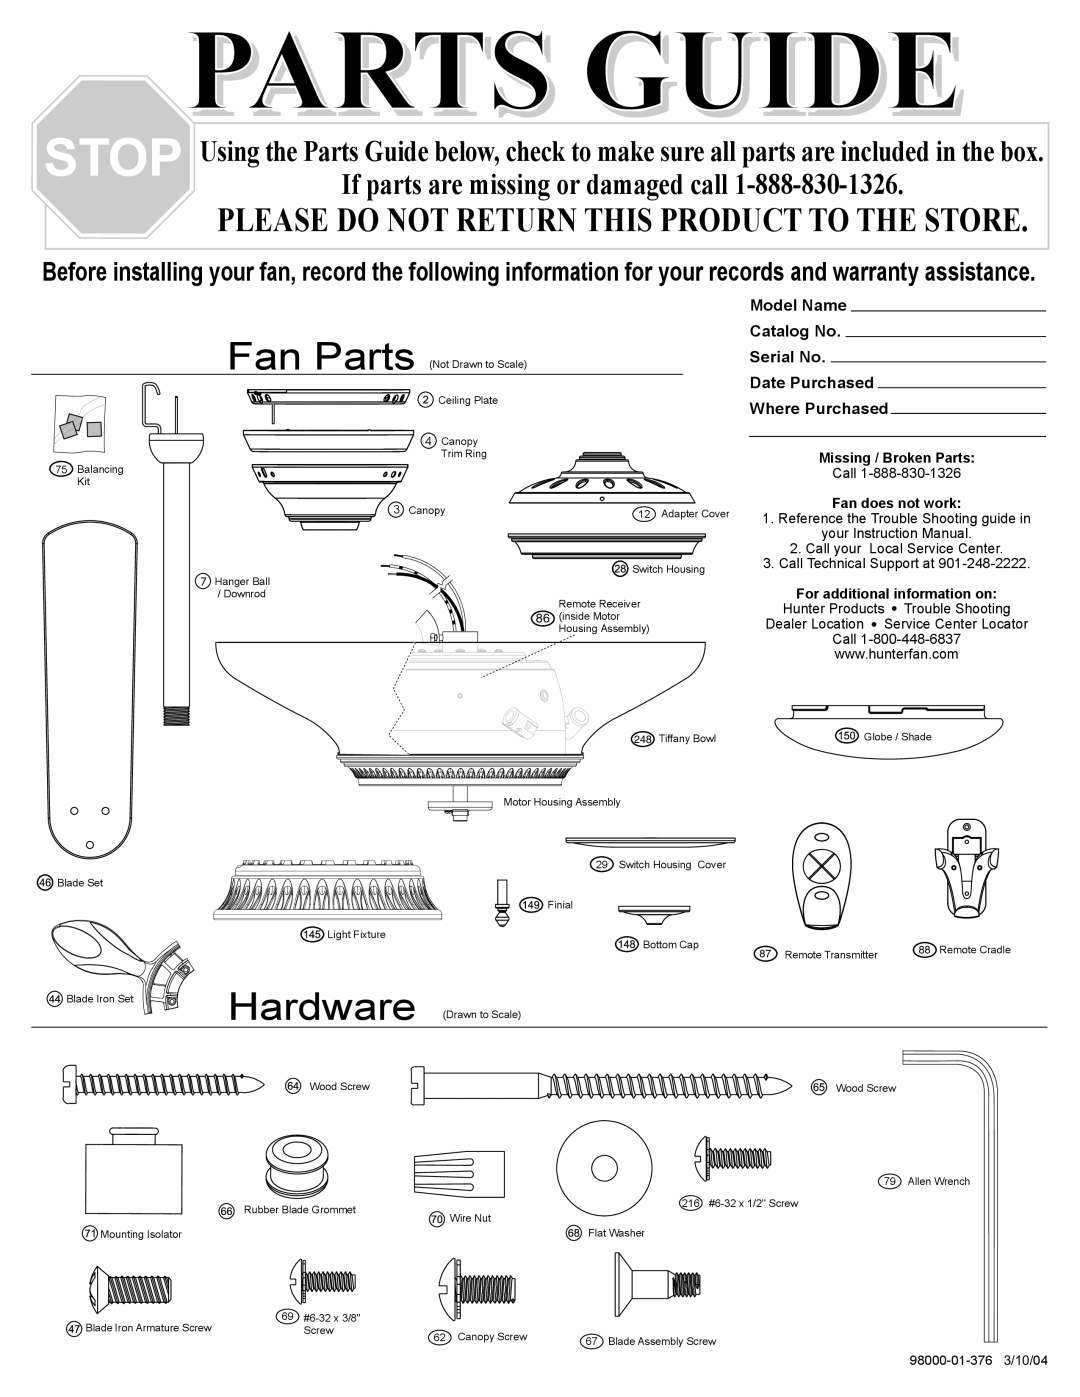 Hunter Fan 28425 warranty Model Name, Catalog No, Serial No, Date Purchased, Where Purchased, Parts Guide, Fan Parts, Call 